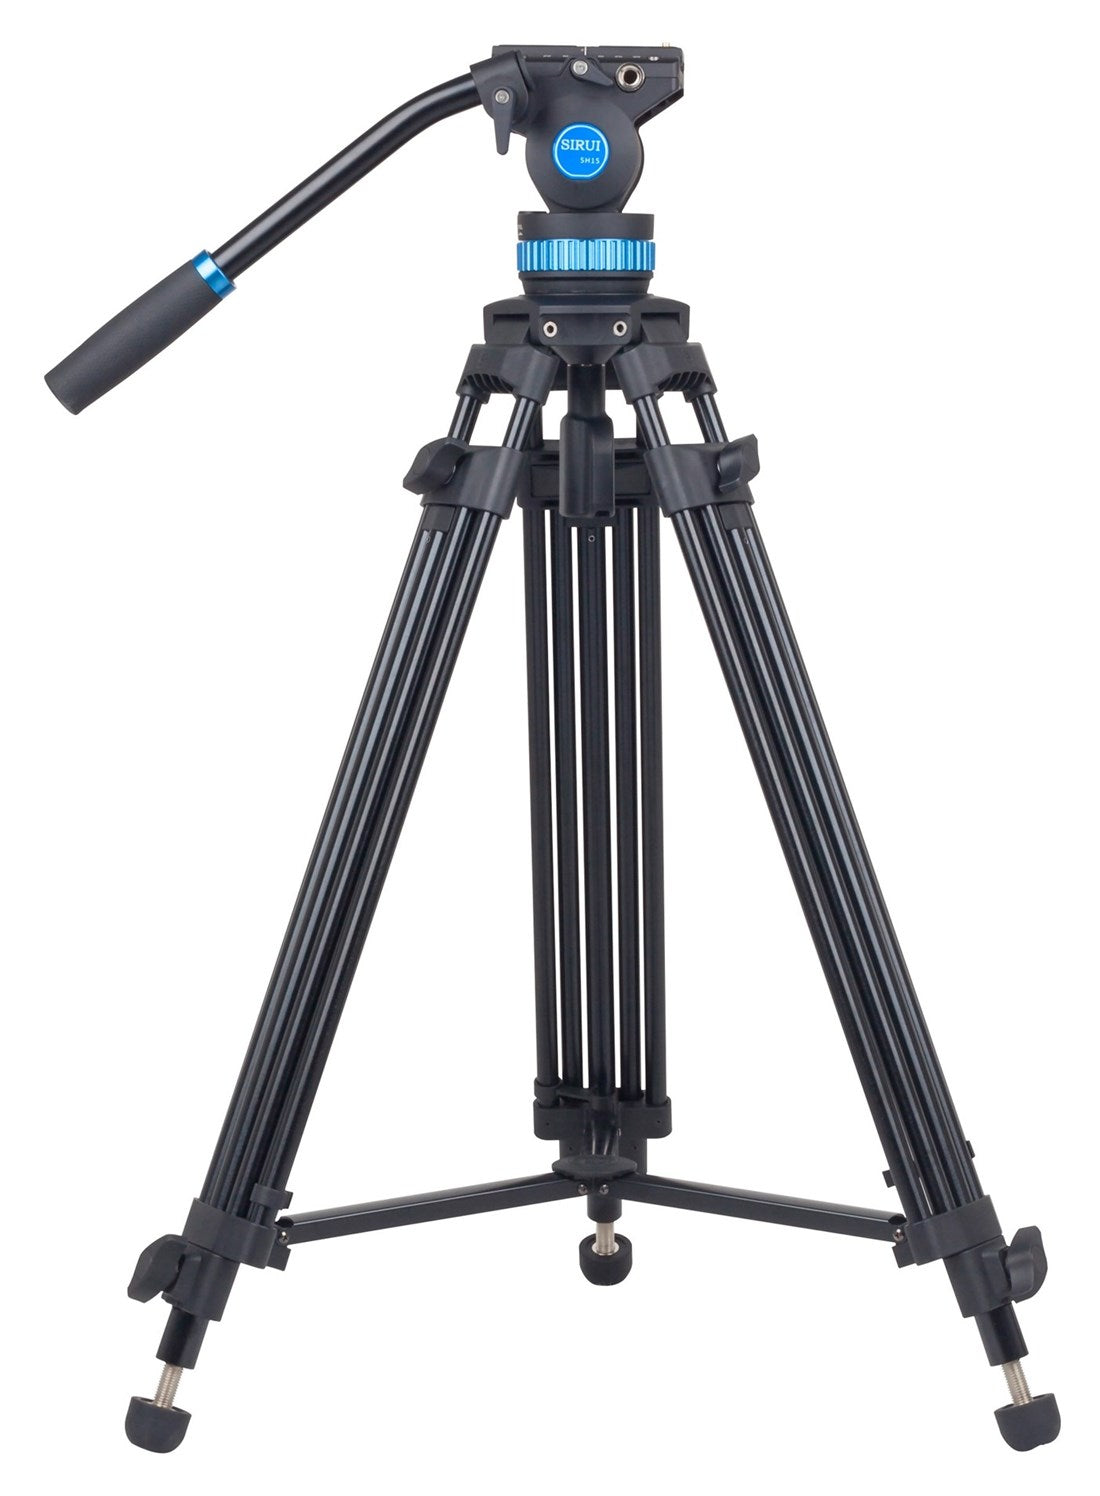 Product Image of Sirui SH-15 Tripod with Video Head Kit